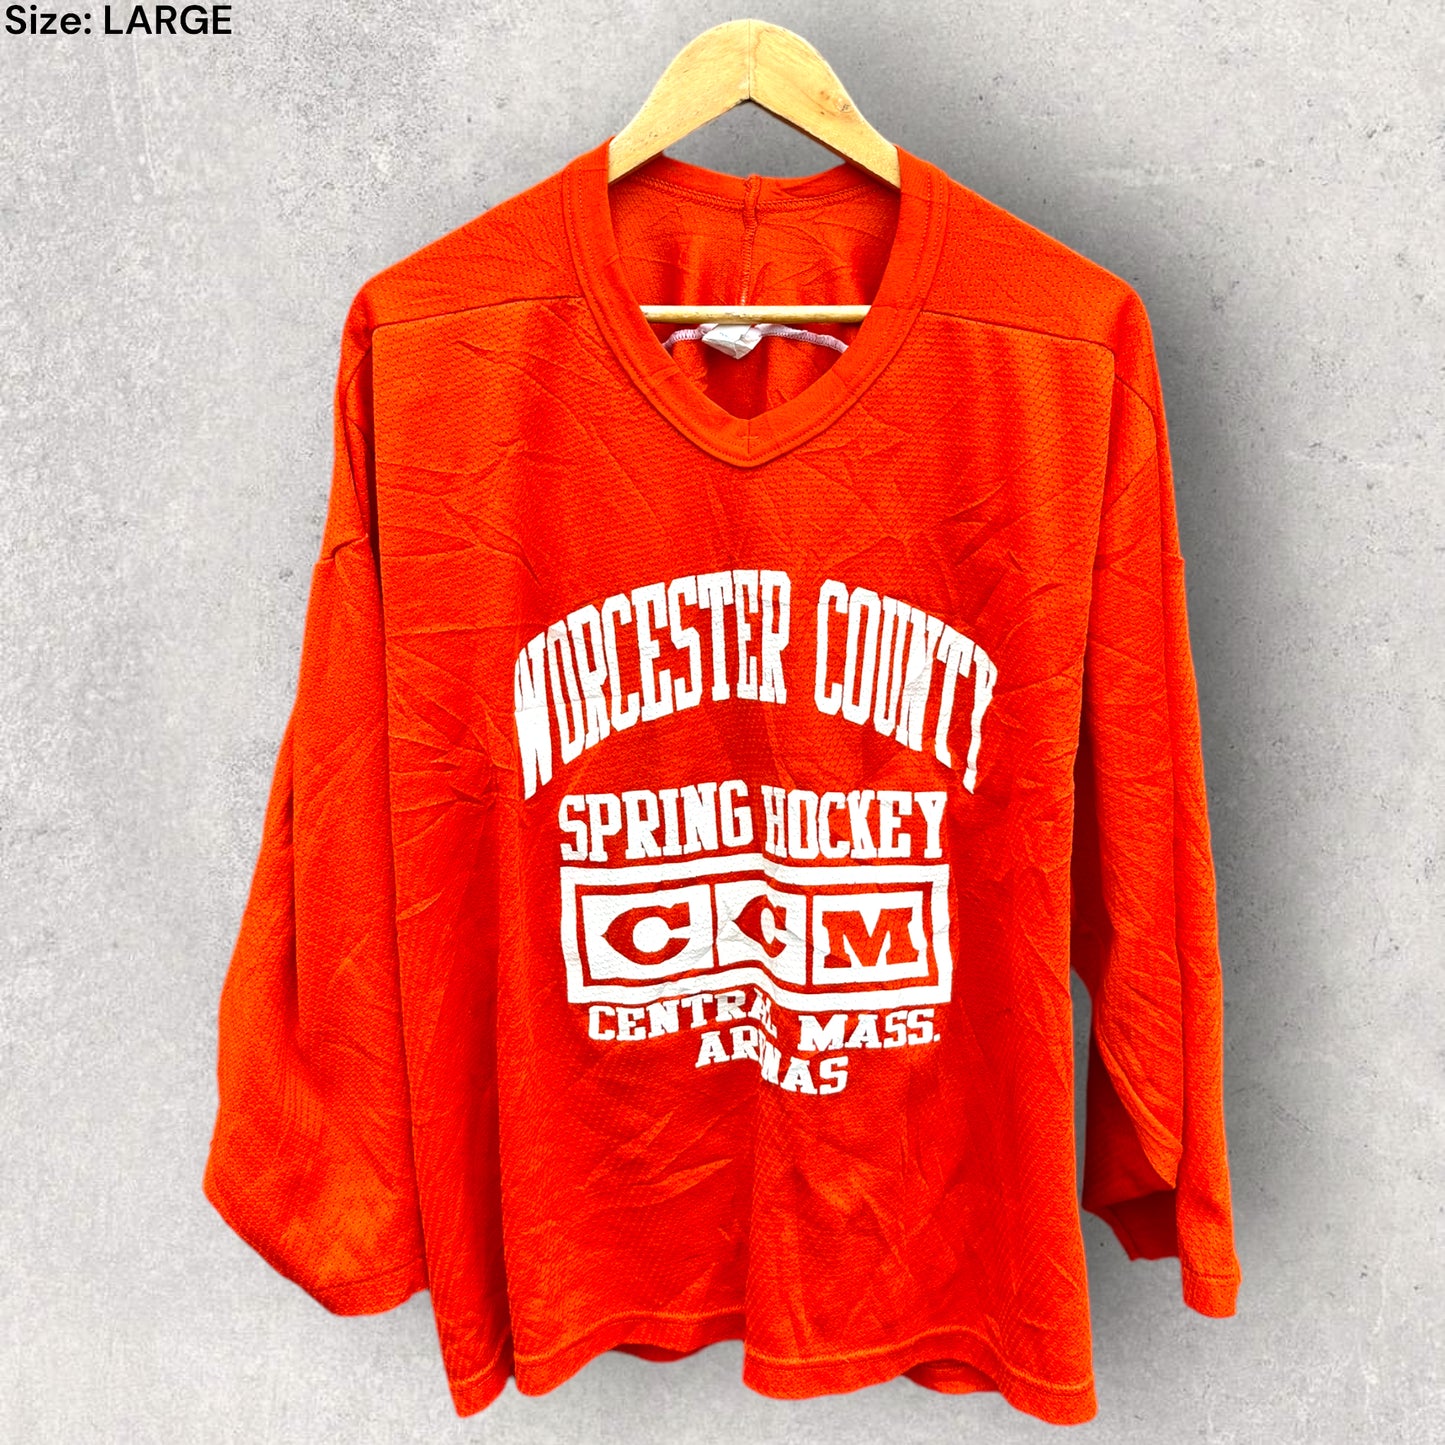 WORCESTER COUNTY CCM VINTAGE HOCKEY JERSEY